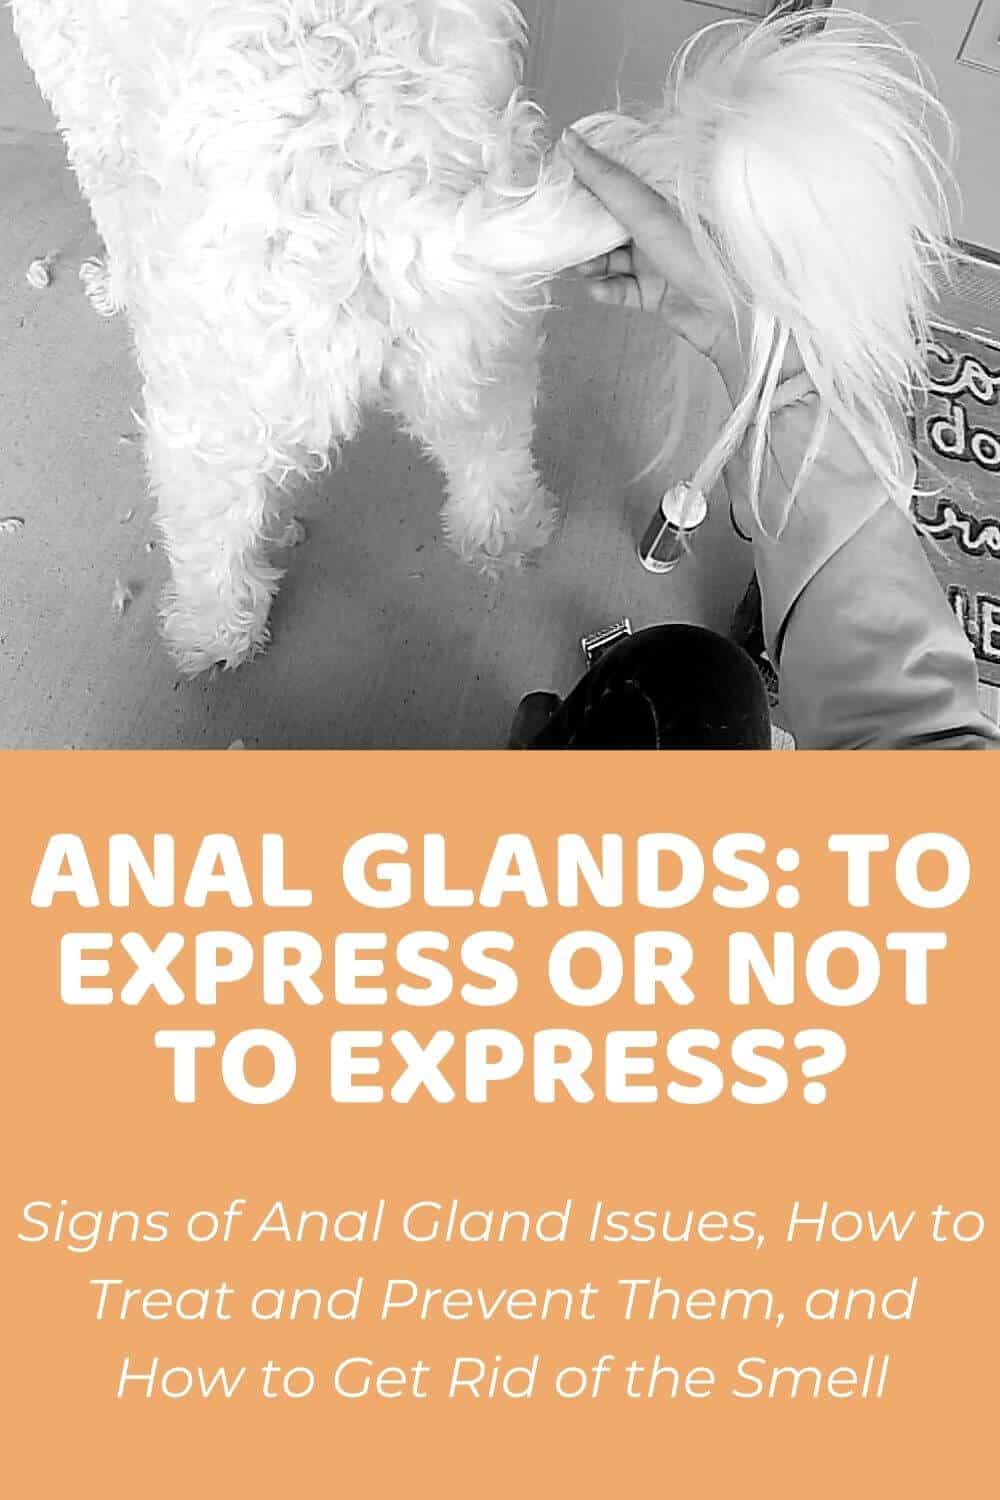 Anal Glands_ Are They Supposed to be Expressed Regularly_